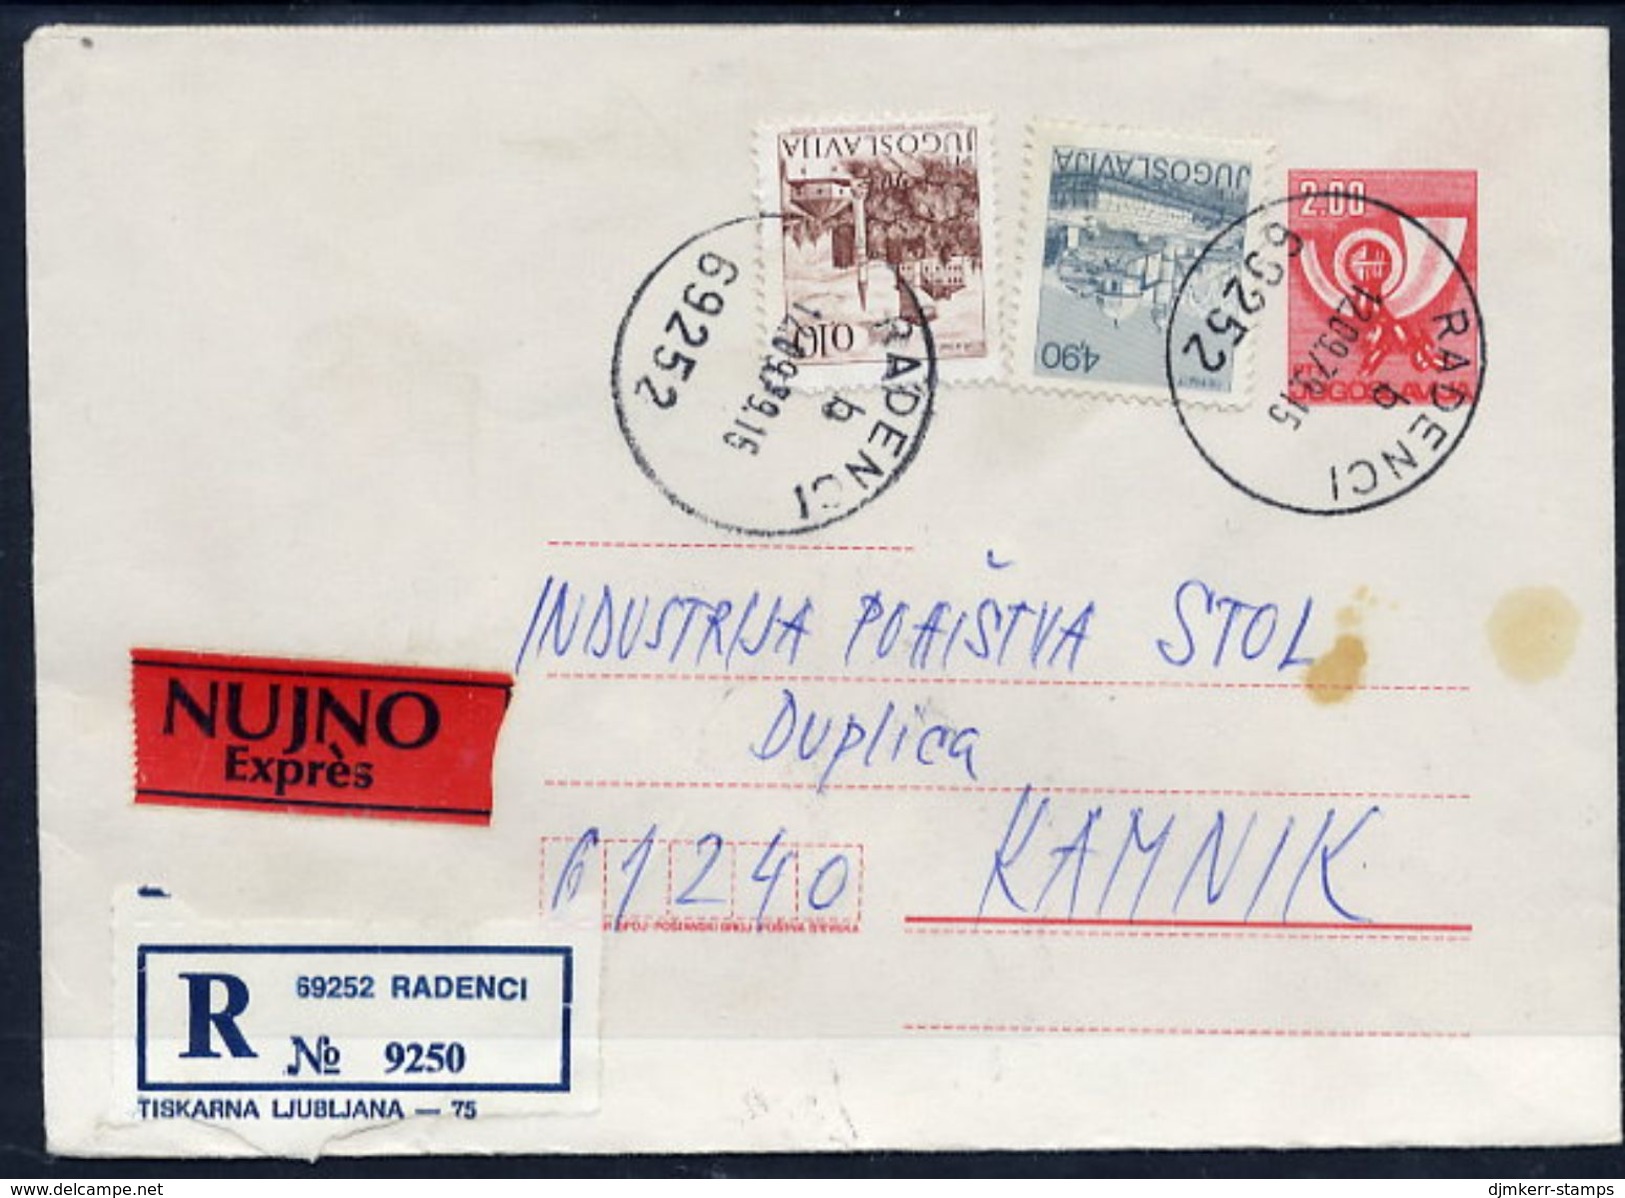 YUGOSLAVIA 1978 Posthorn 2 D.stationery Envelope Used With Additional Franking And Express Label  Michel U71 - Postal Stationery